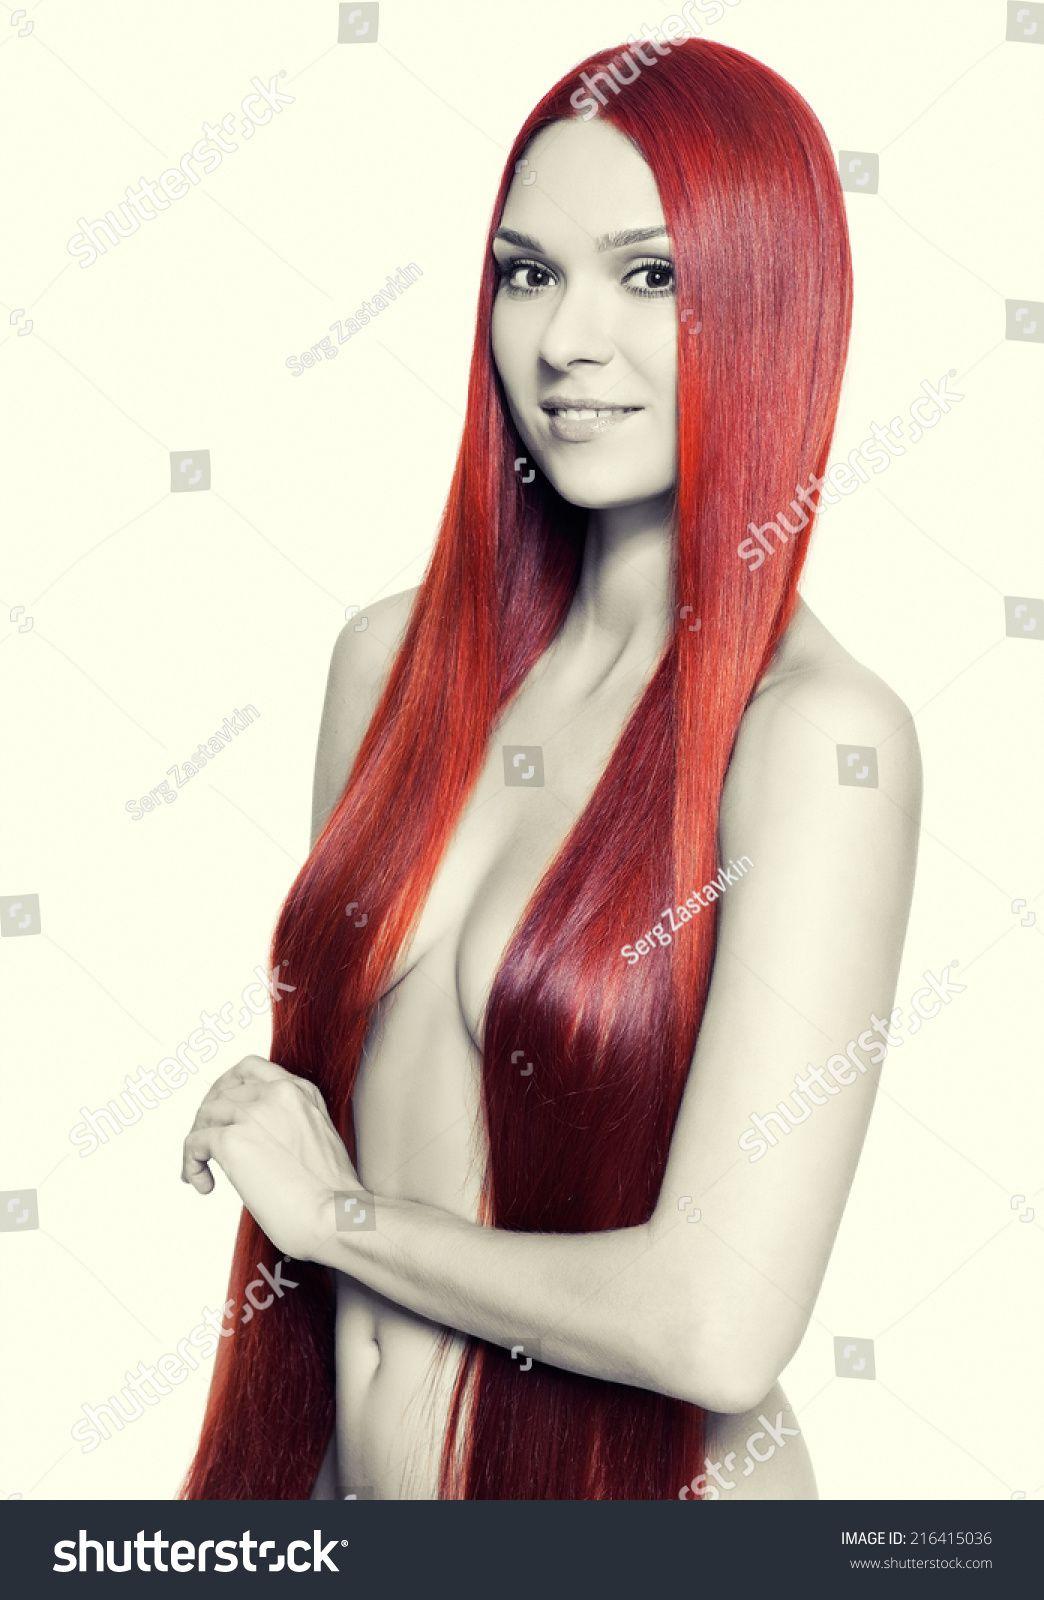 Naked woman red hair